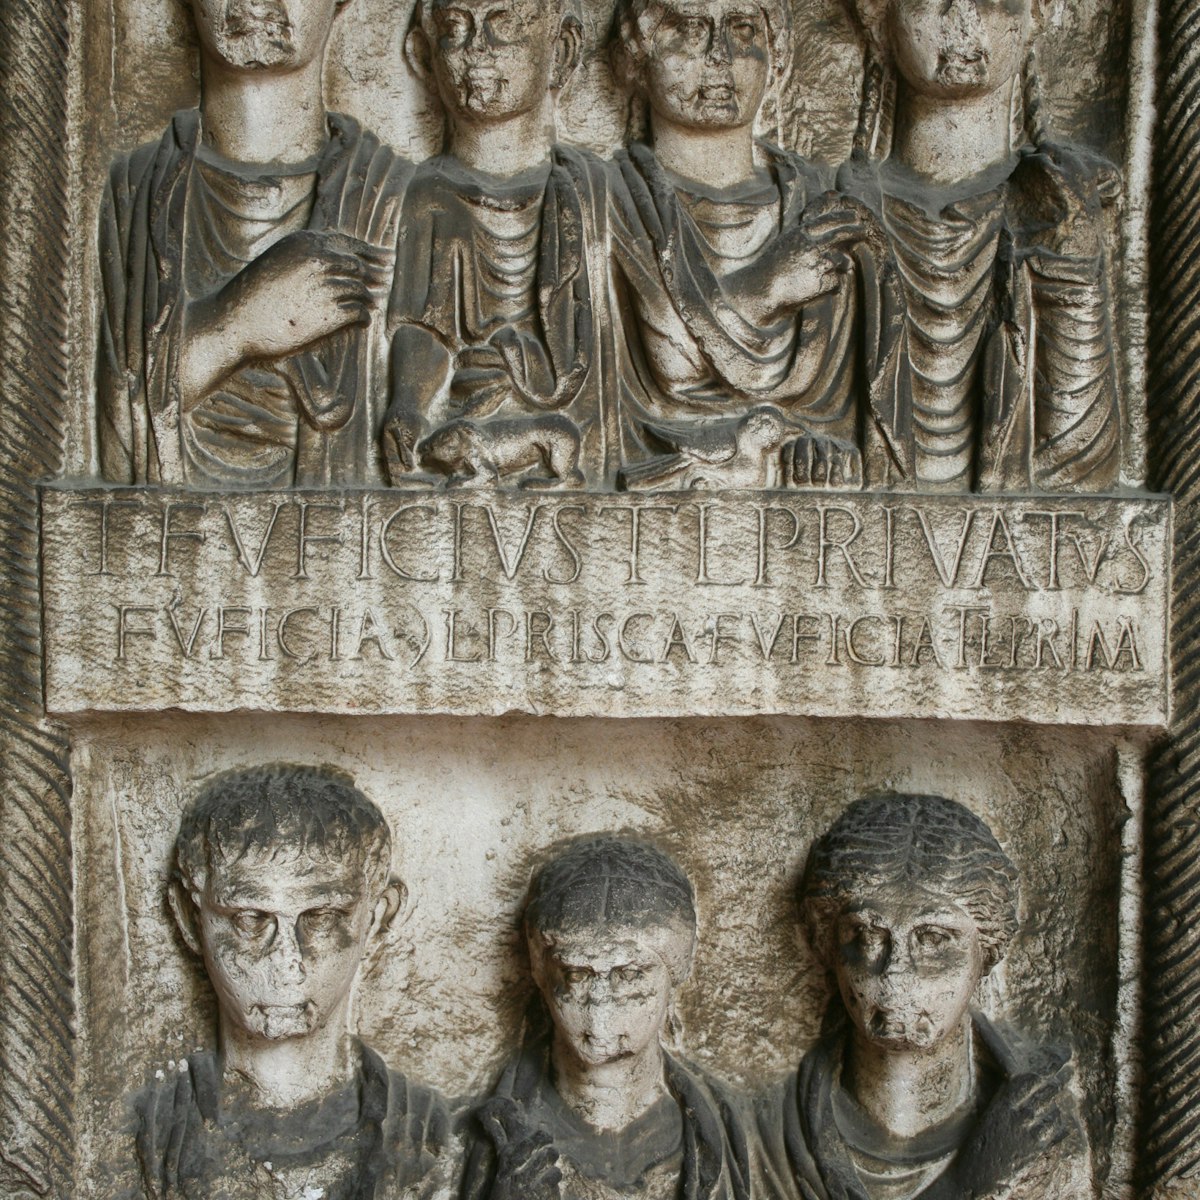 Figurative carvings on Roman-era tomb at Archaeological Museum.